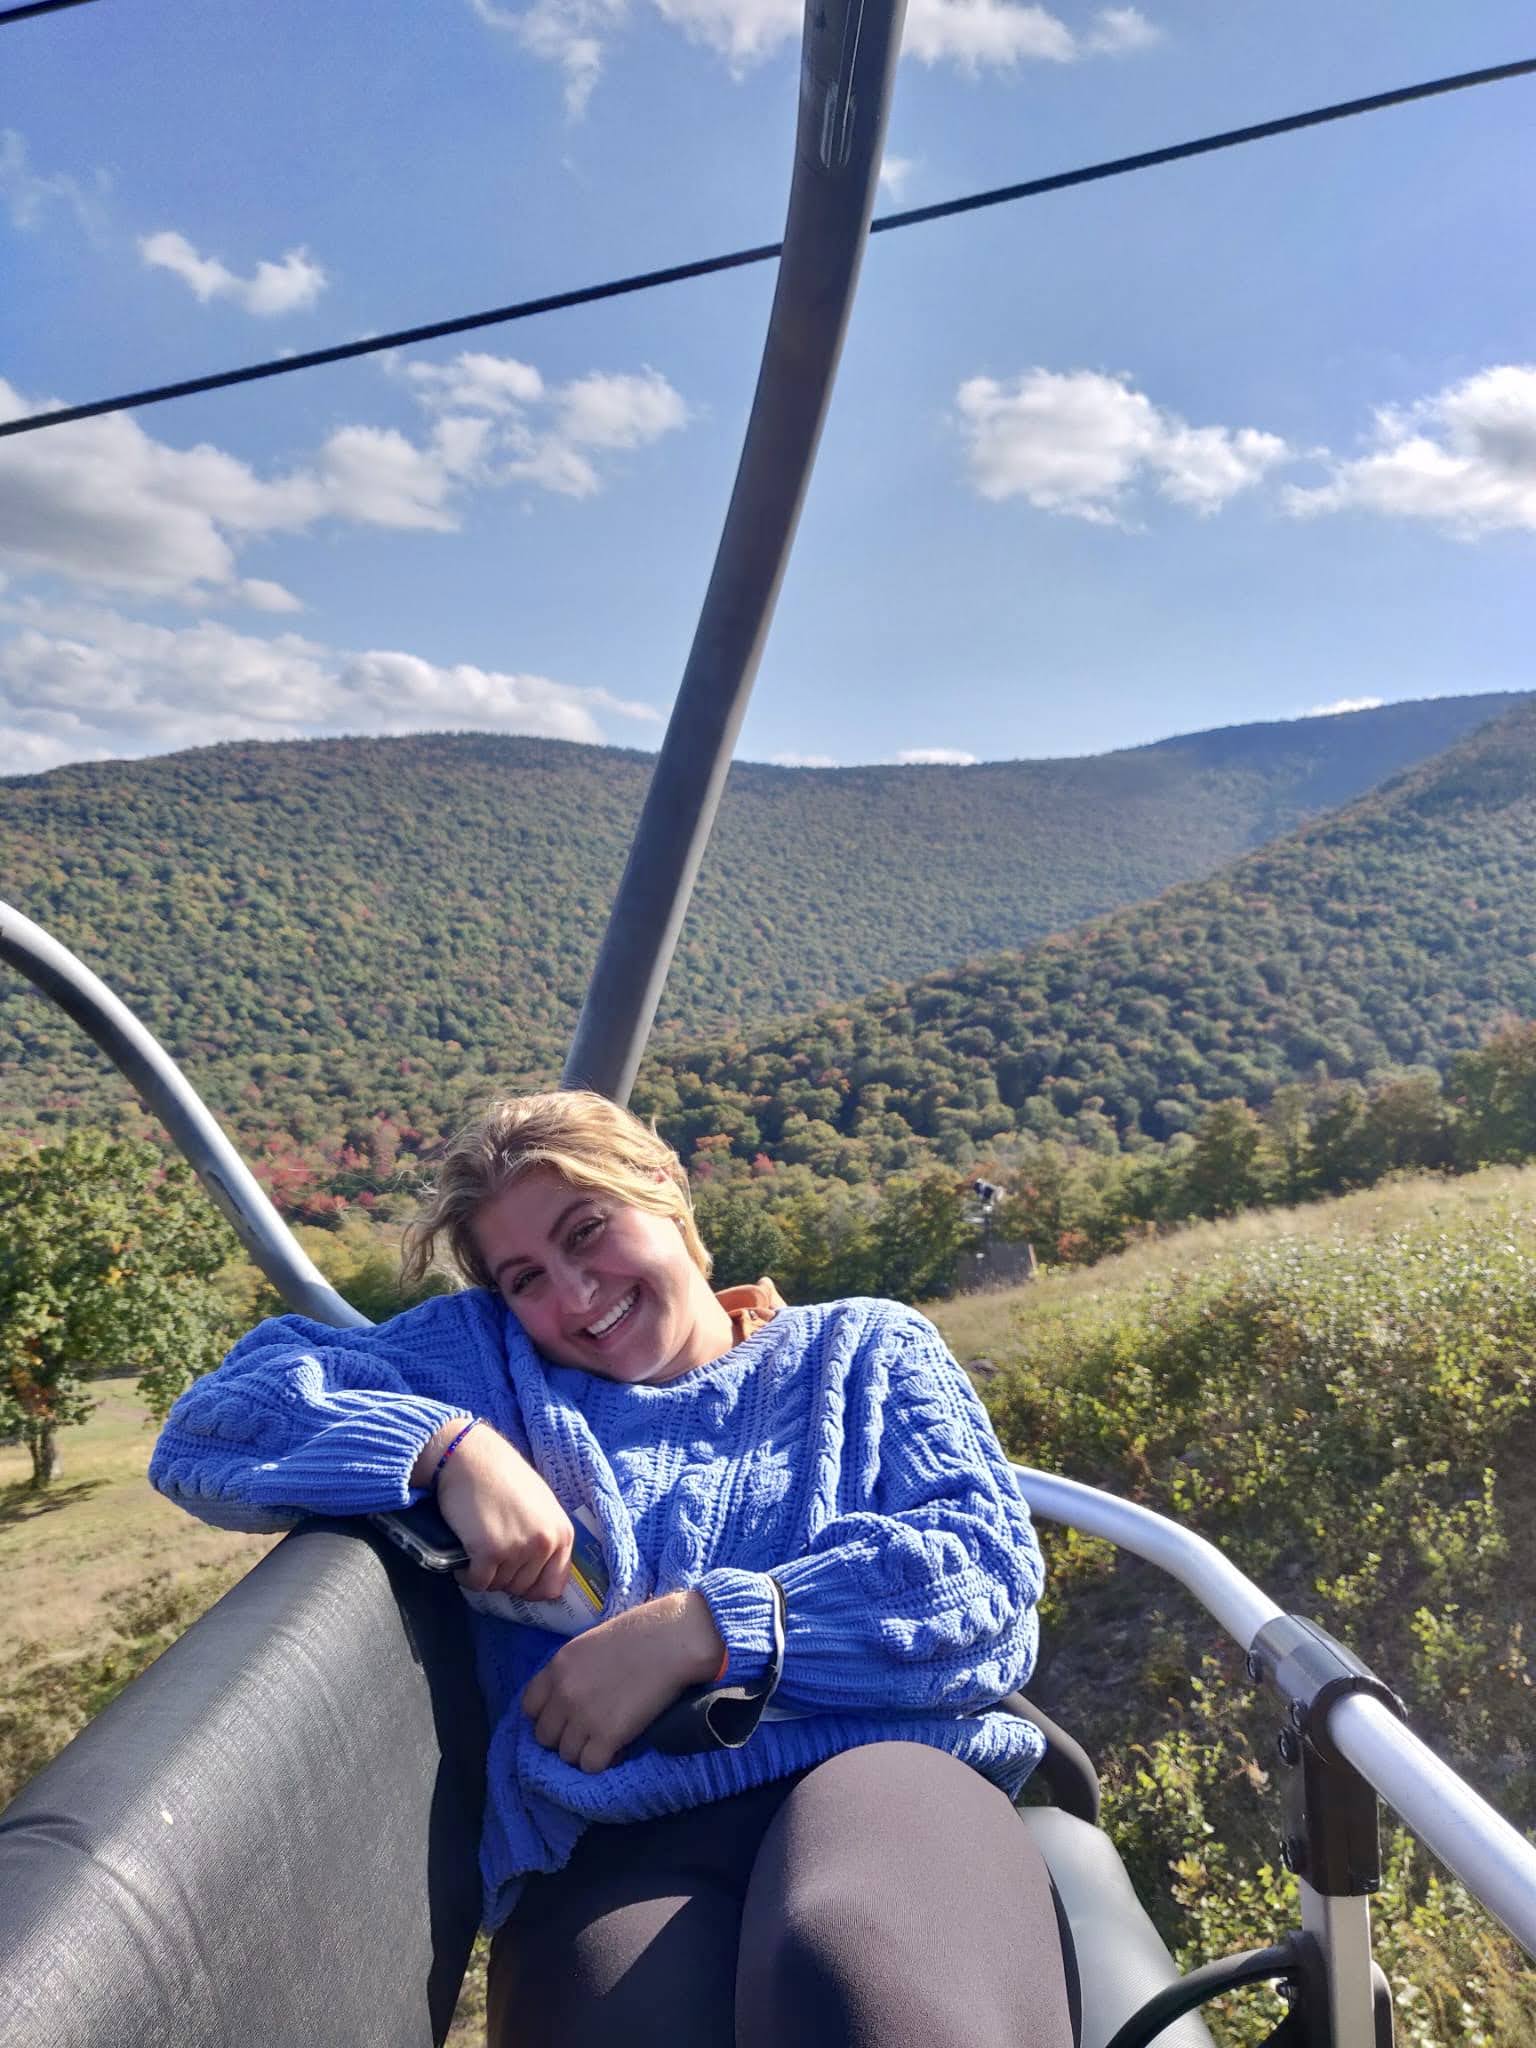 Sarah wearing a blue sweater sitting on a ski-lift during the summer, there are hills covered in green trees behind her.